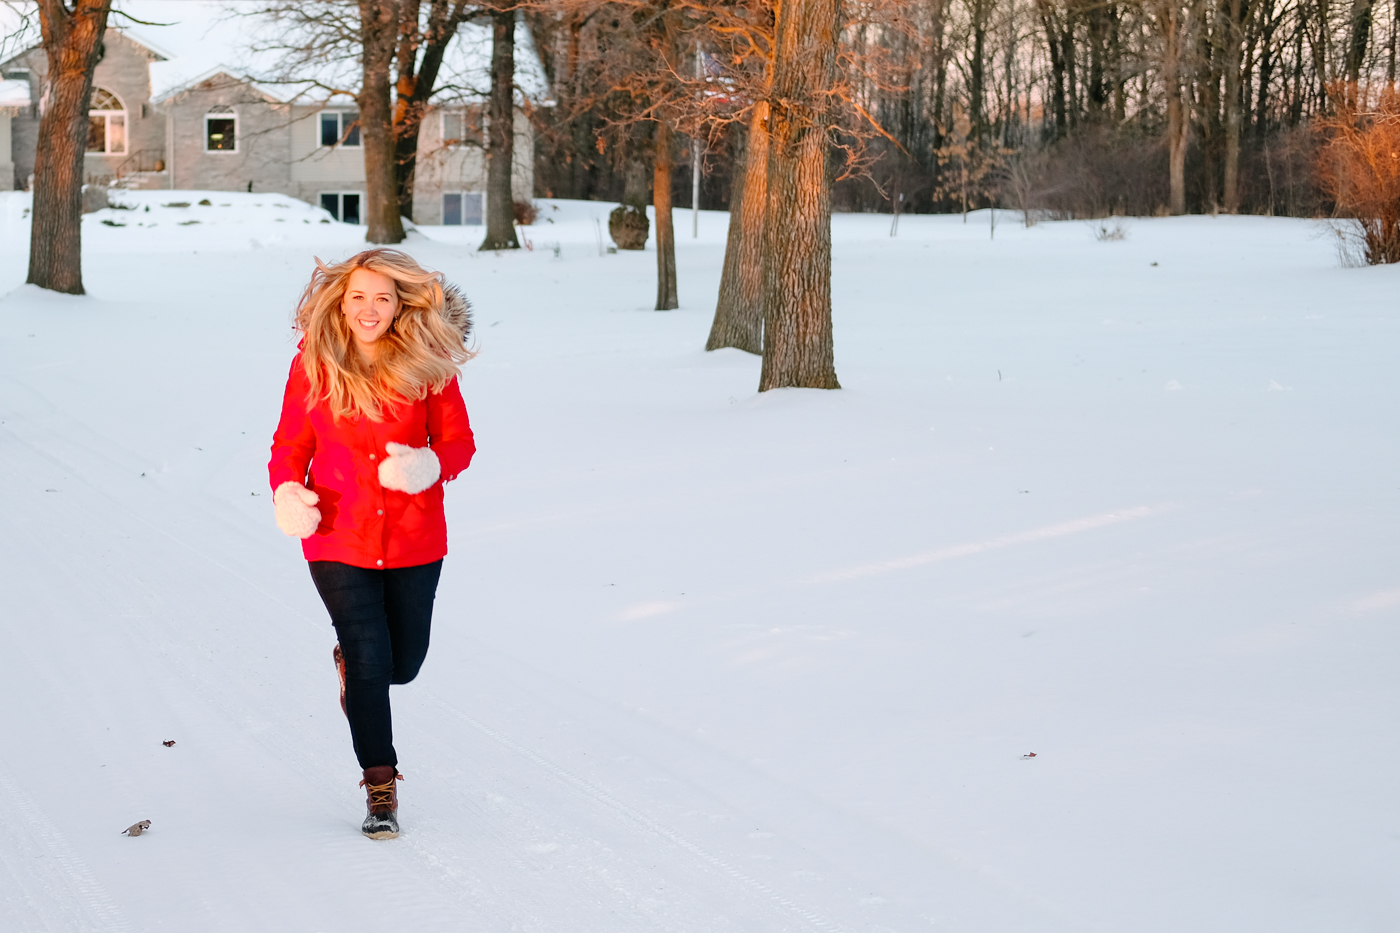 Debora Dahl running in the snow with hair blowing in the wind